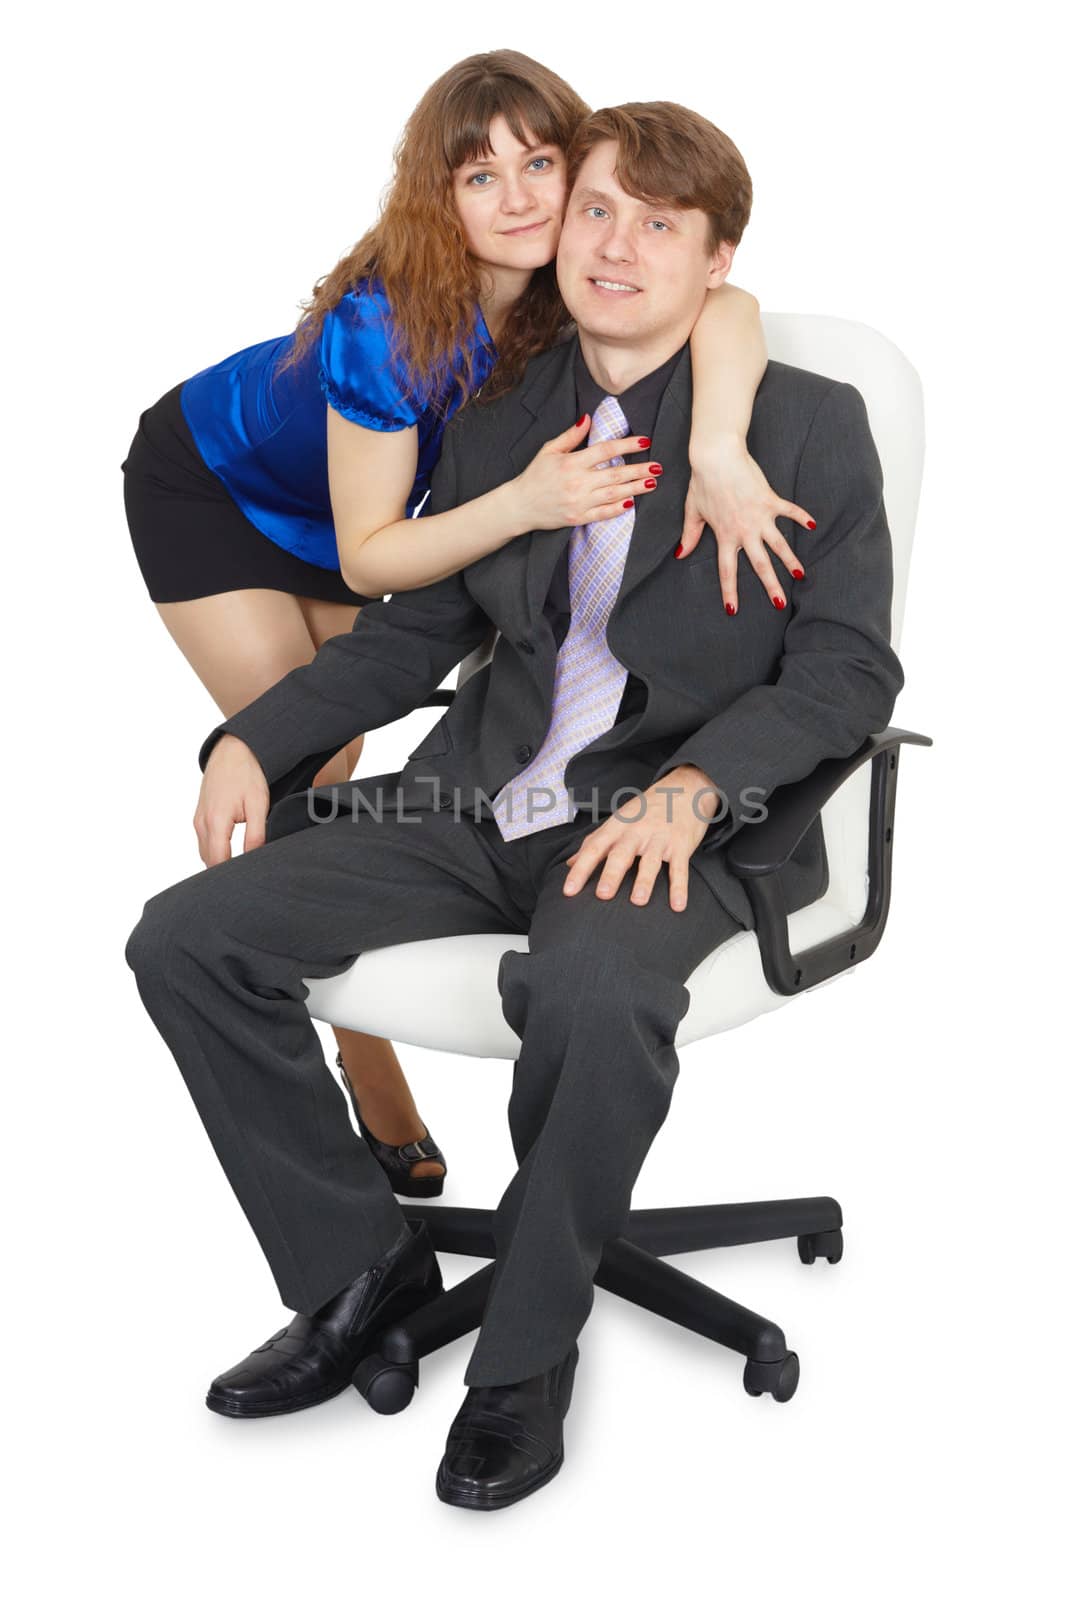 Woman embraces a young man in an office chair by pzaxe